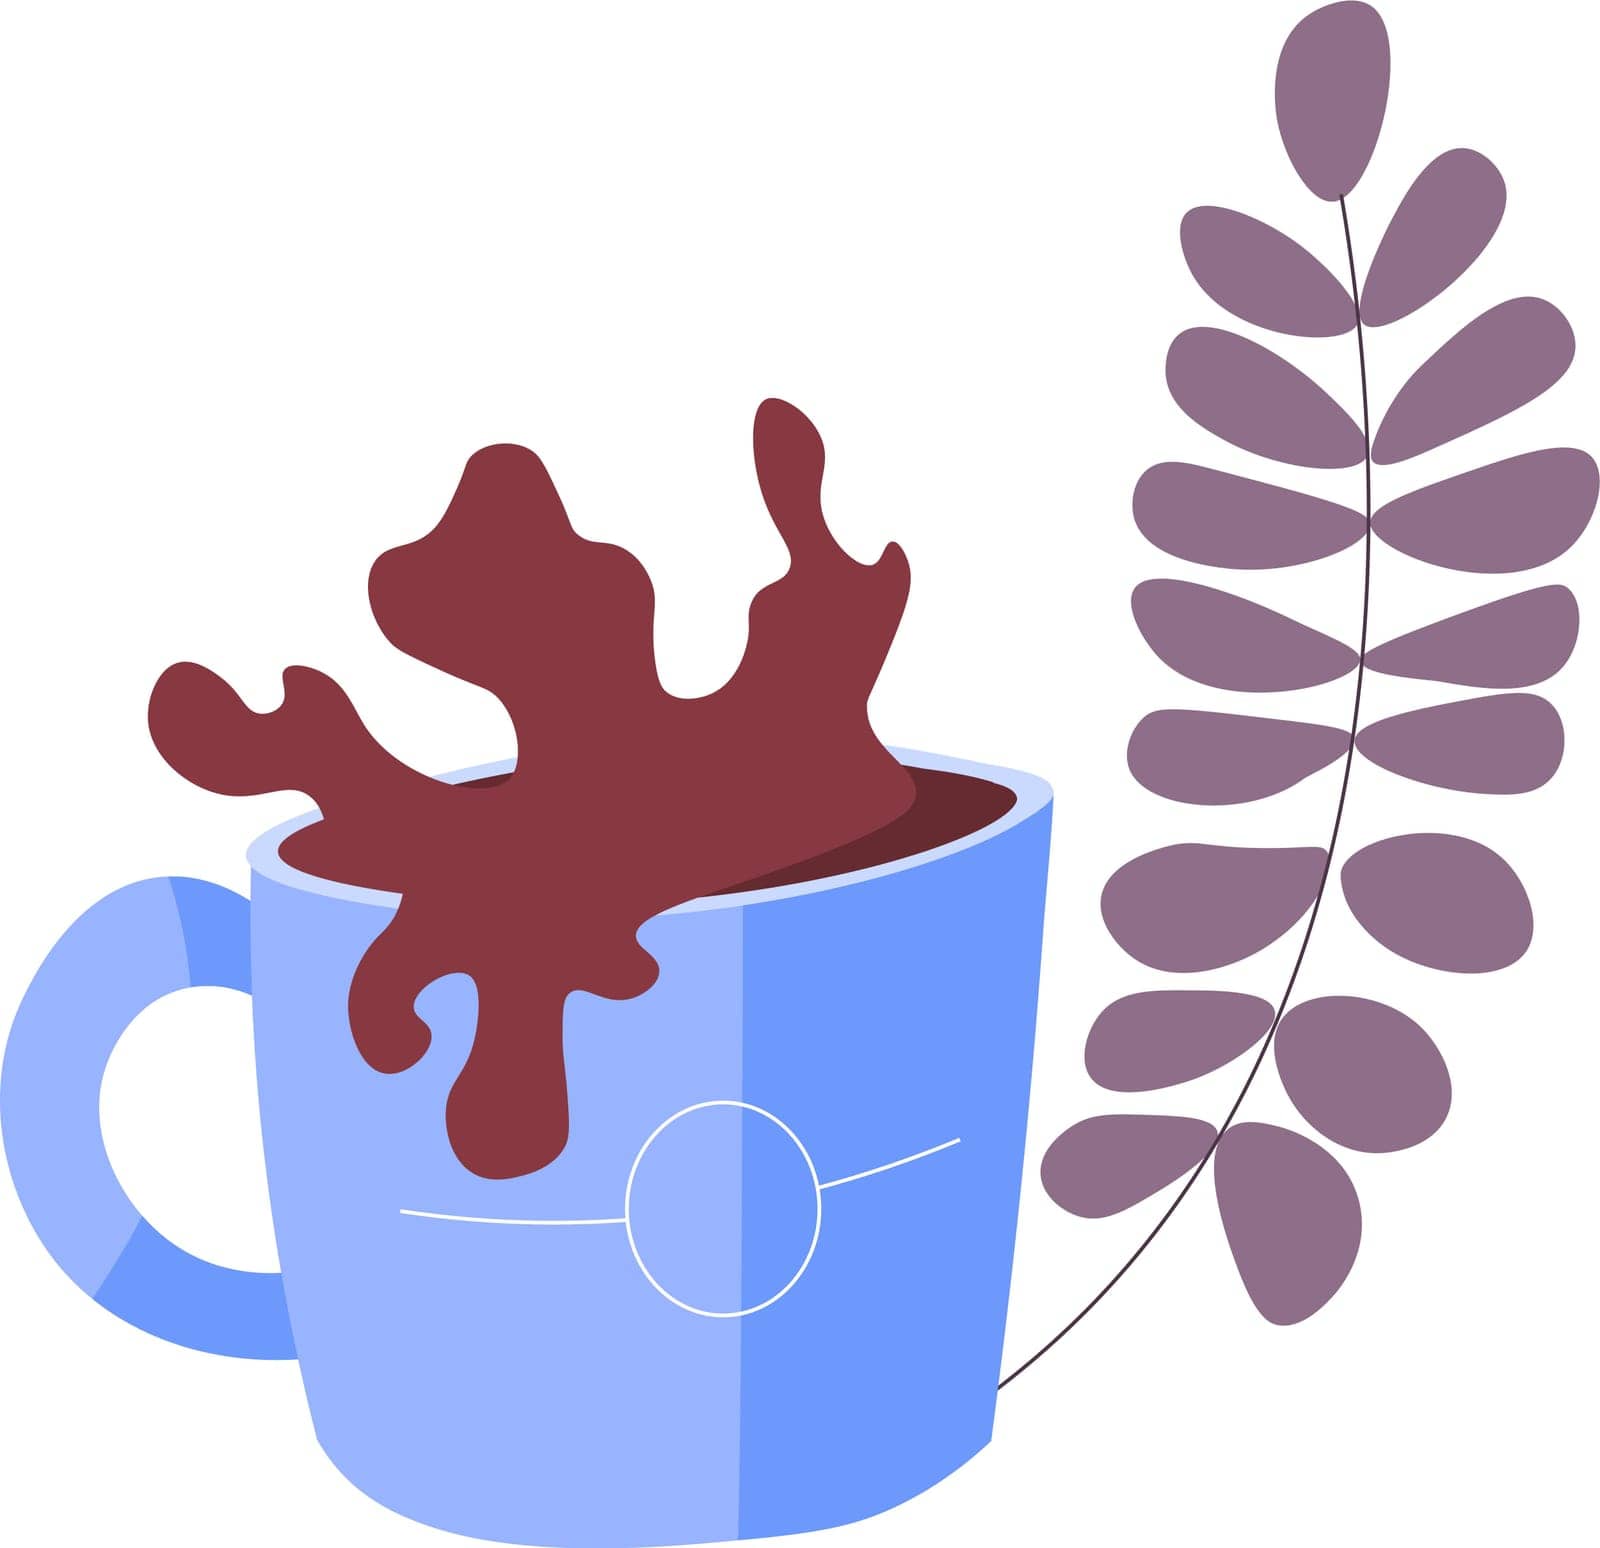 Mug of chocolate or coffee, cappuccino or tea, isolated cup of warm drink or beverage. Flora and blossom, bloom and decorative branch. Promotion and presentation or ads. Vector in flat style